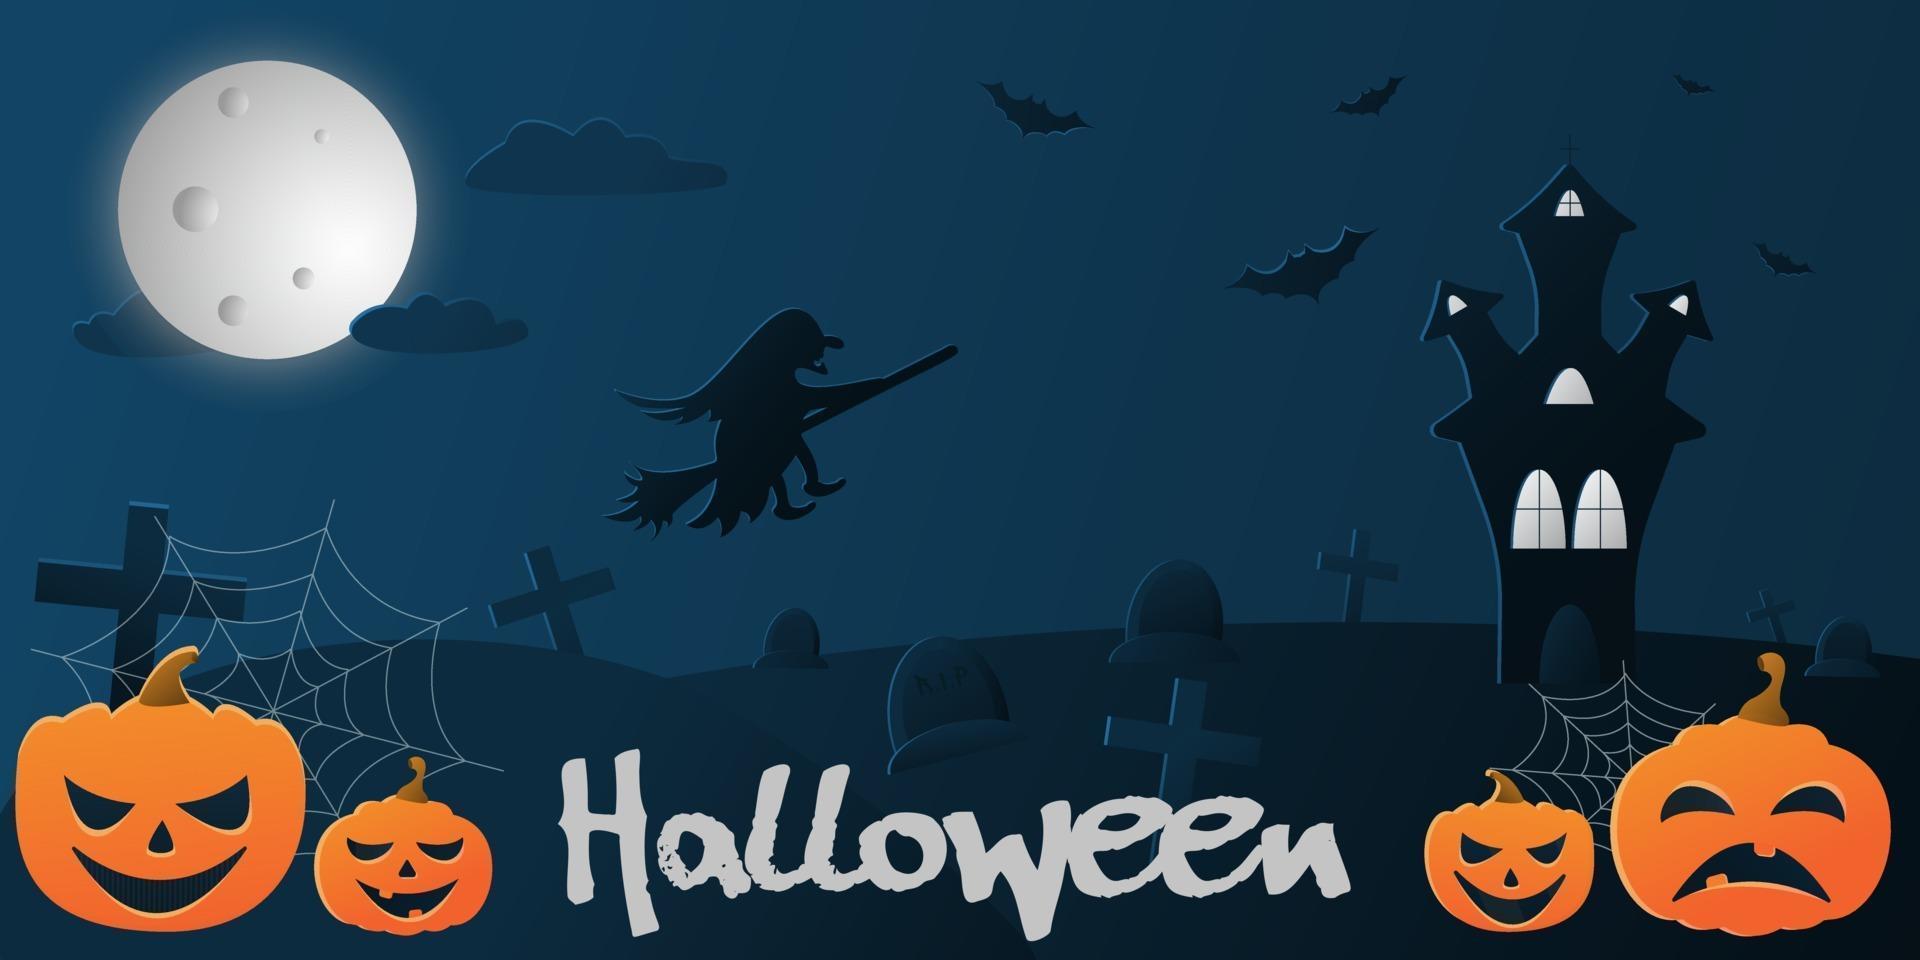 Vector flat illustration with a gradient on halloween theme, blue background with the image of a flying witch in the sky, a castle, bats and pumpkins